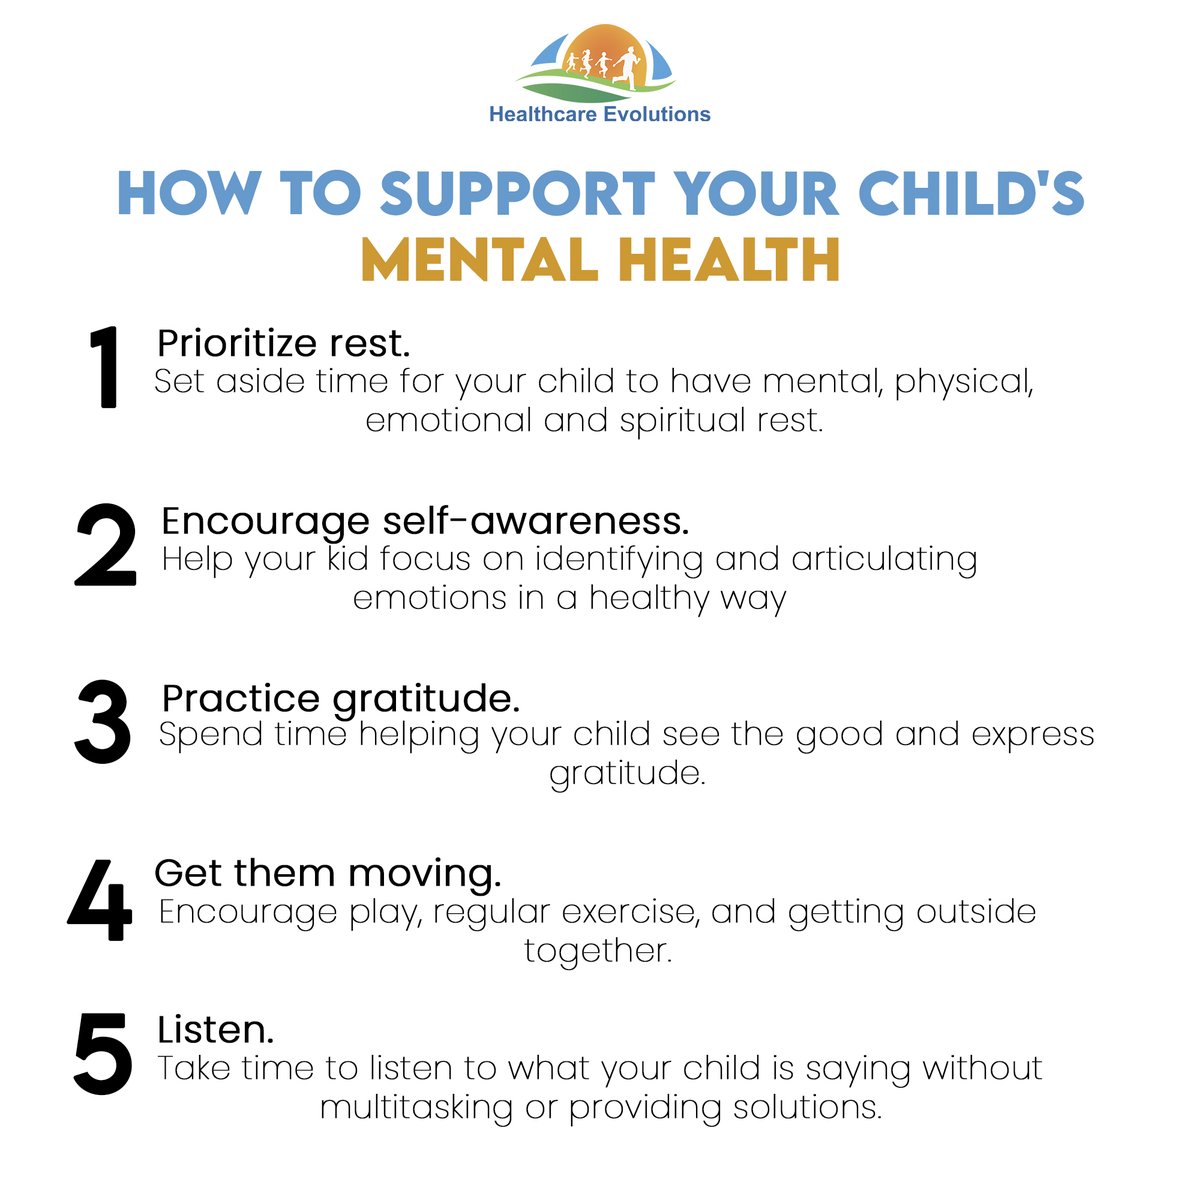 Why Child Mental Health Support is Important 👇

#mentalhealth #mentalhealthawareness #mentalhealthmatters #mentalhealthrecovery #mentalhealthwarrior #mentalhealthsupport #mentalhealthawarness #mentalhealthadvocate #mentalhealthissues #mentalhealthwarriors